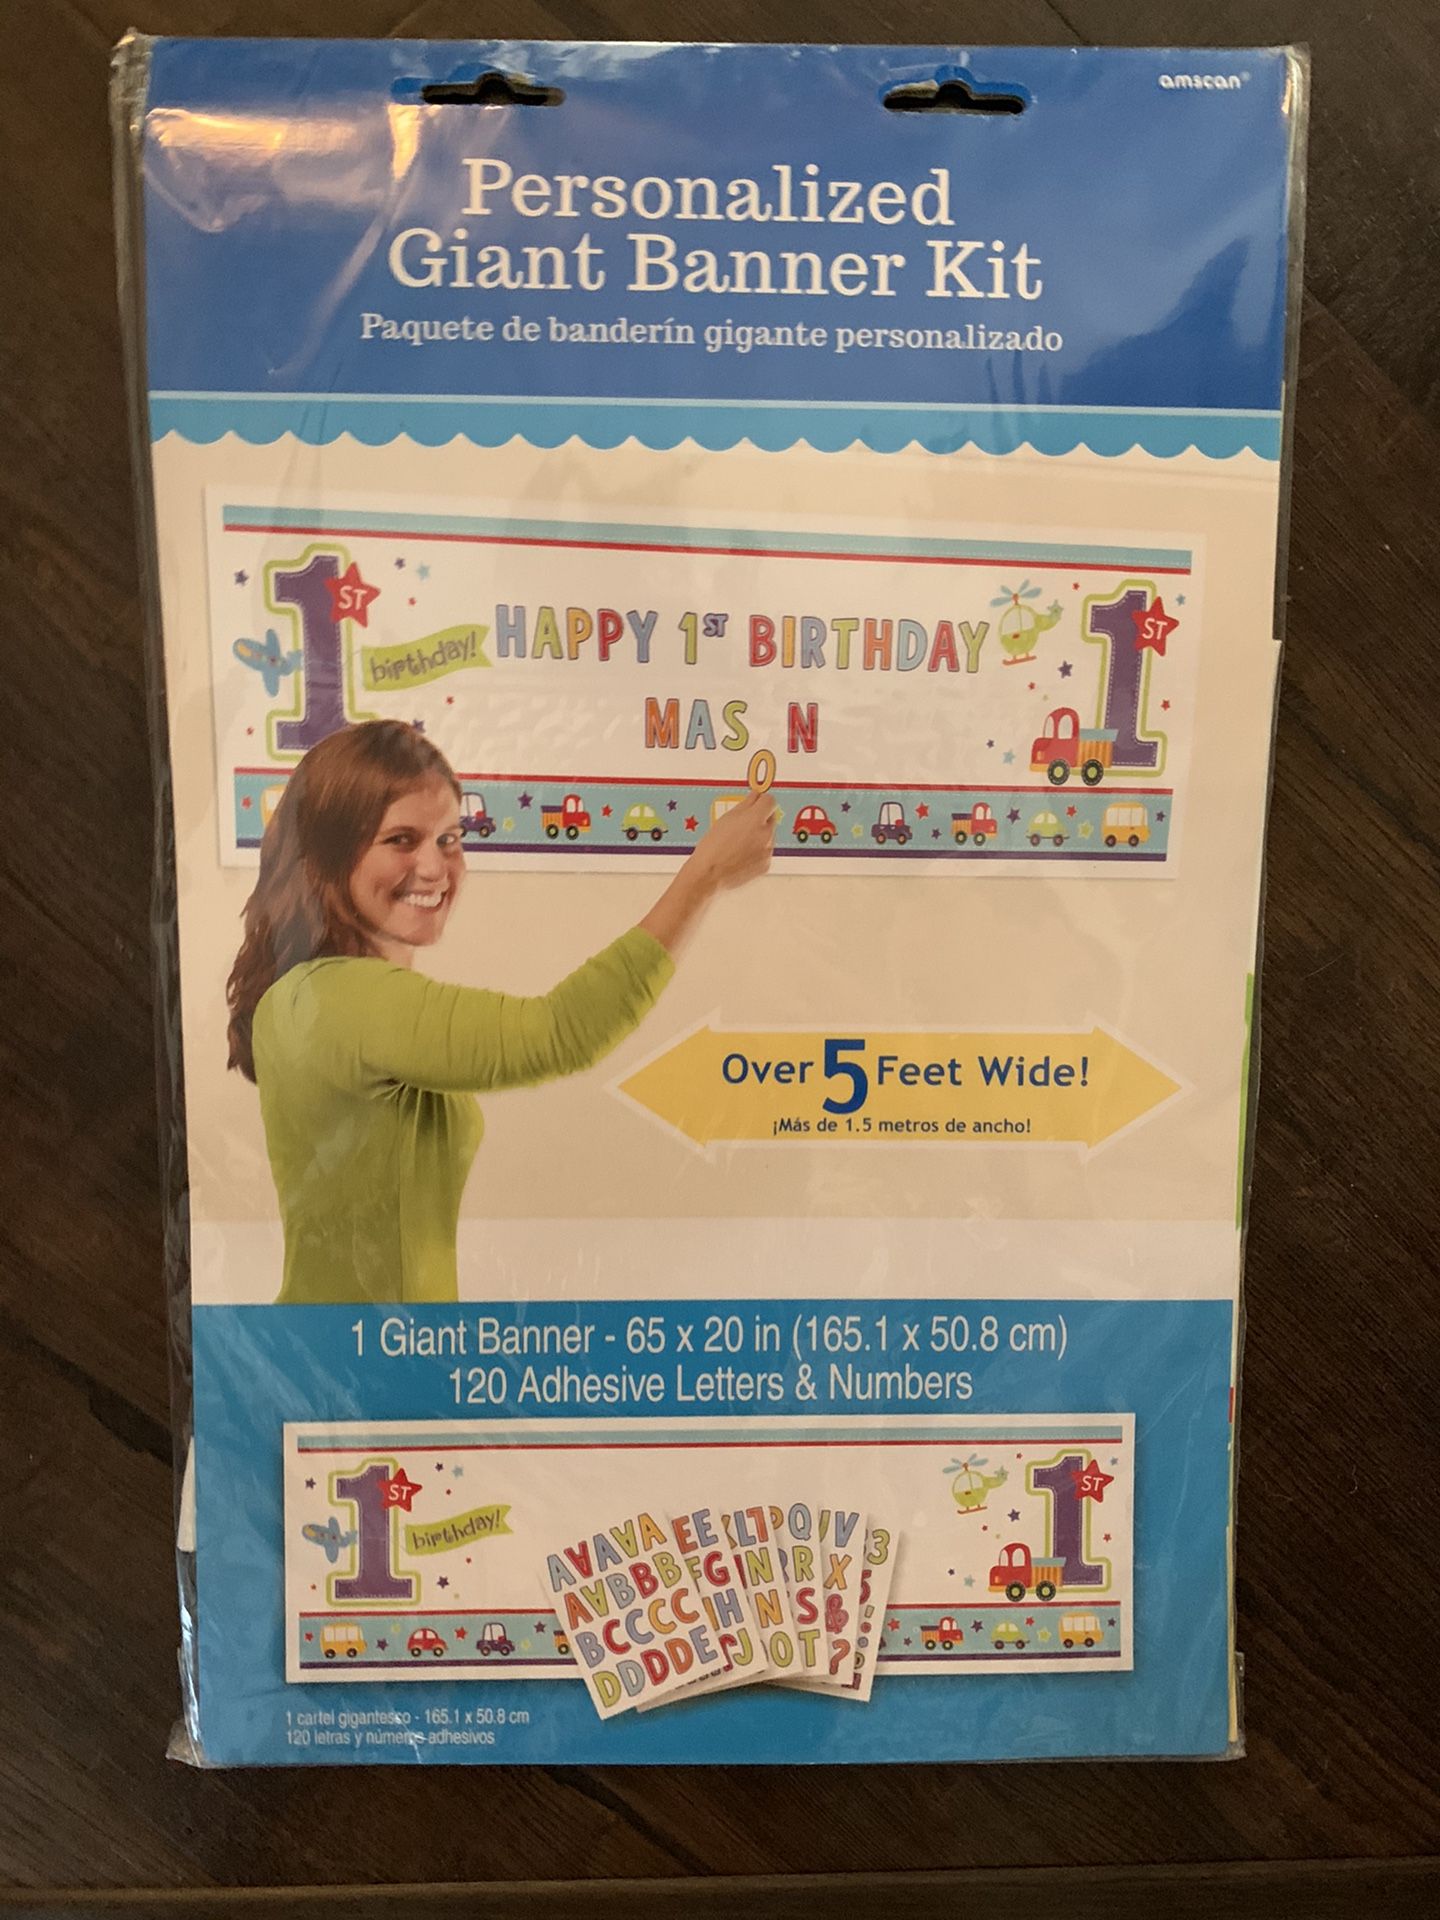 Personalized 1st birthday banner kit